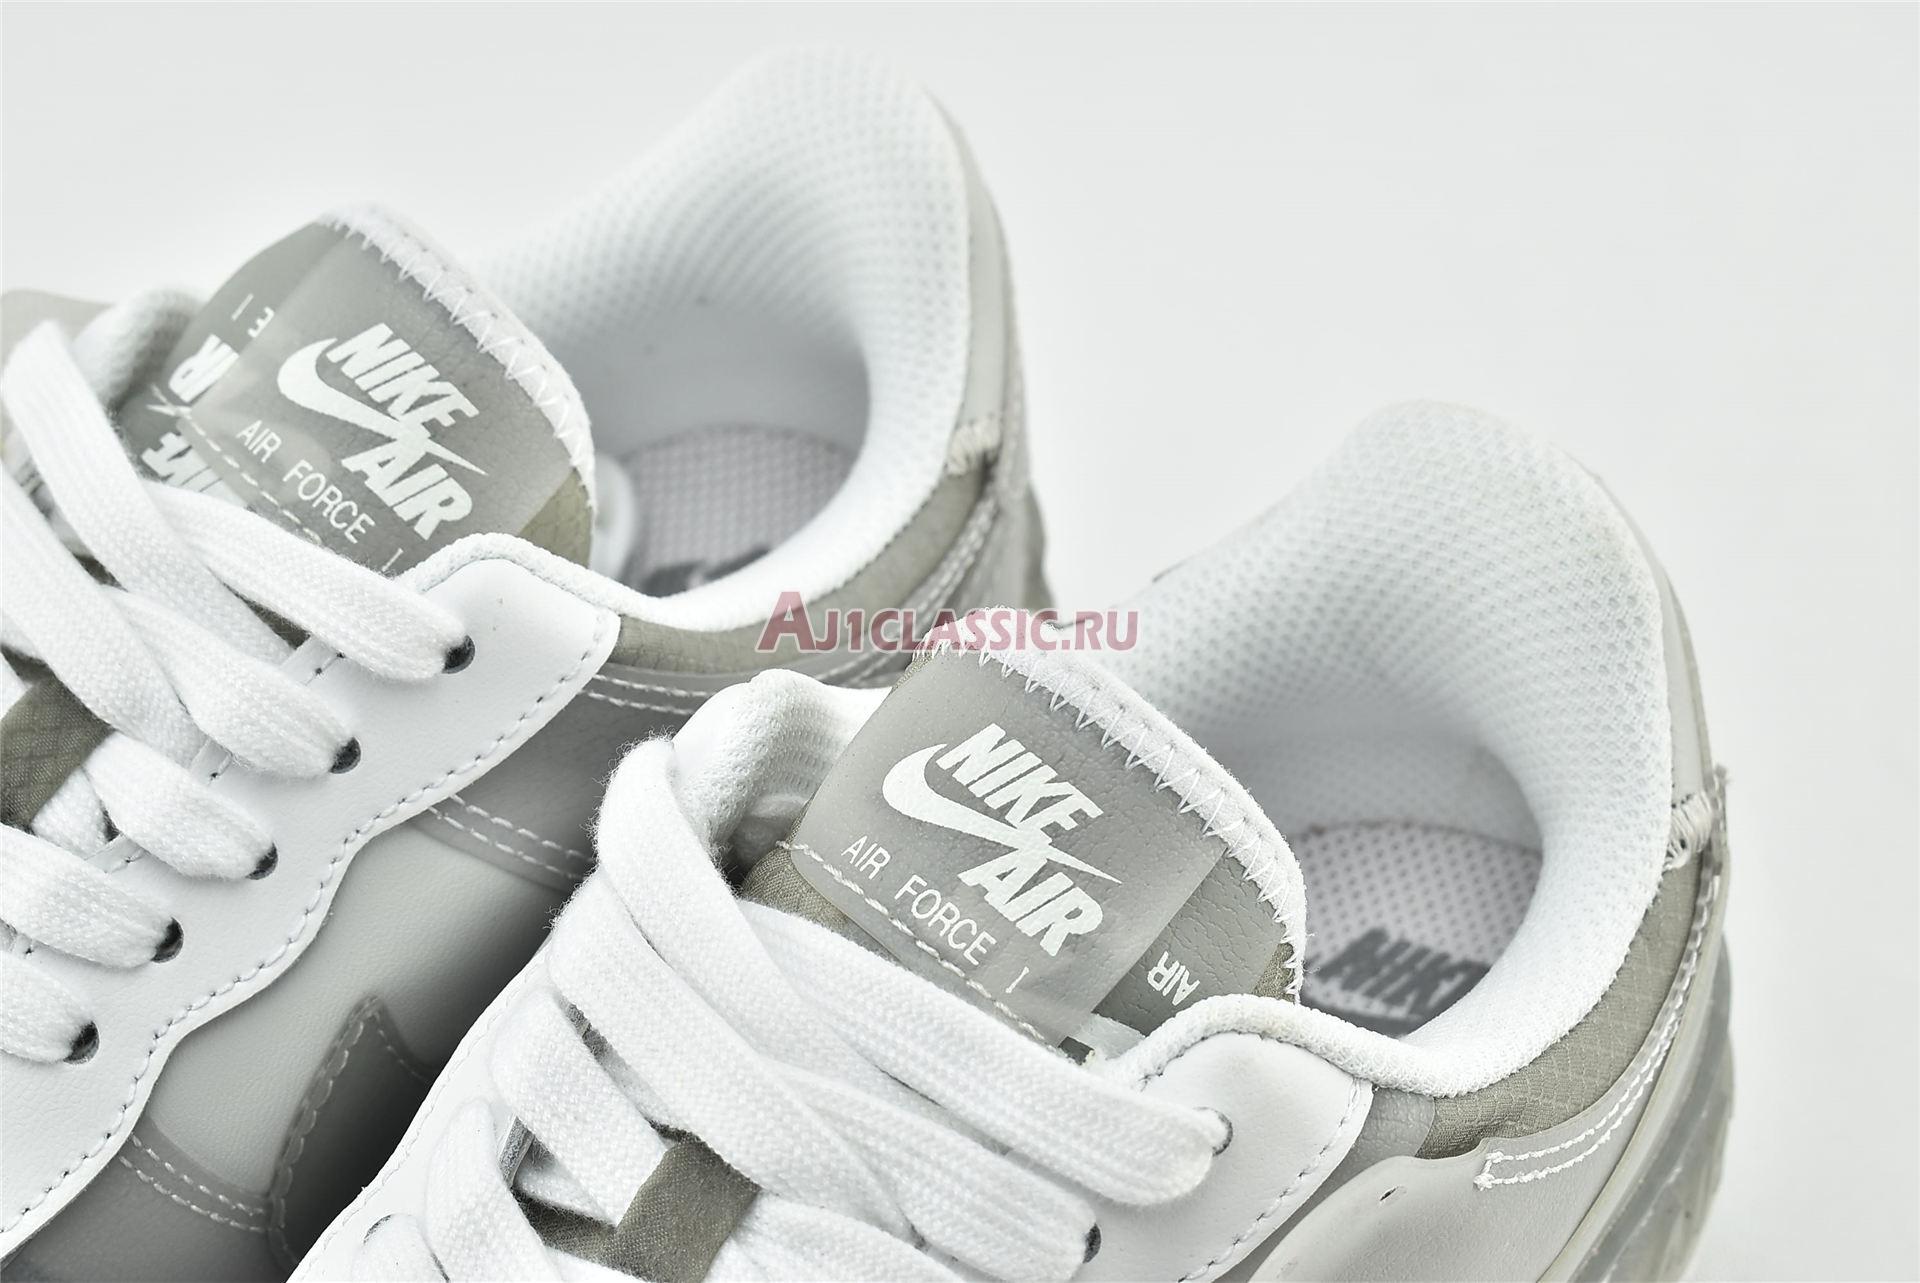 Nike Wmns Air Force 1 Shadow SE "Particle Grey" CK6561-100